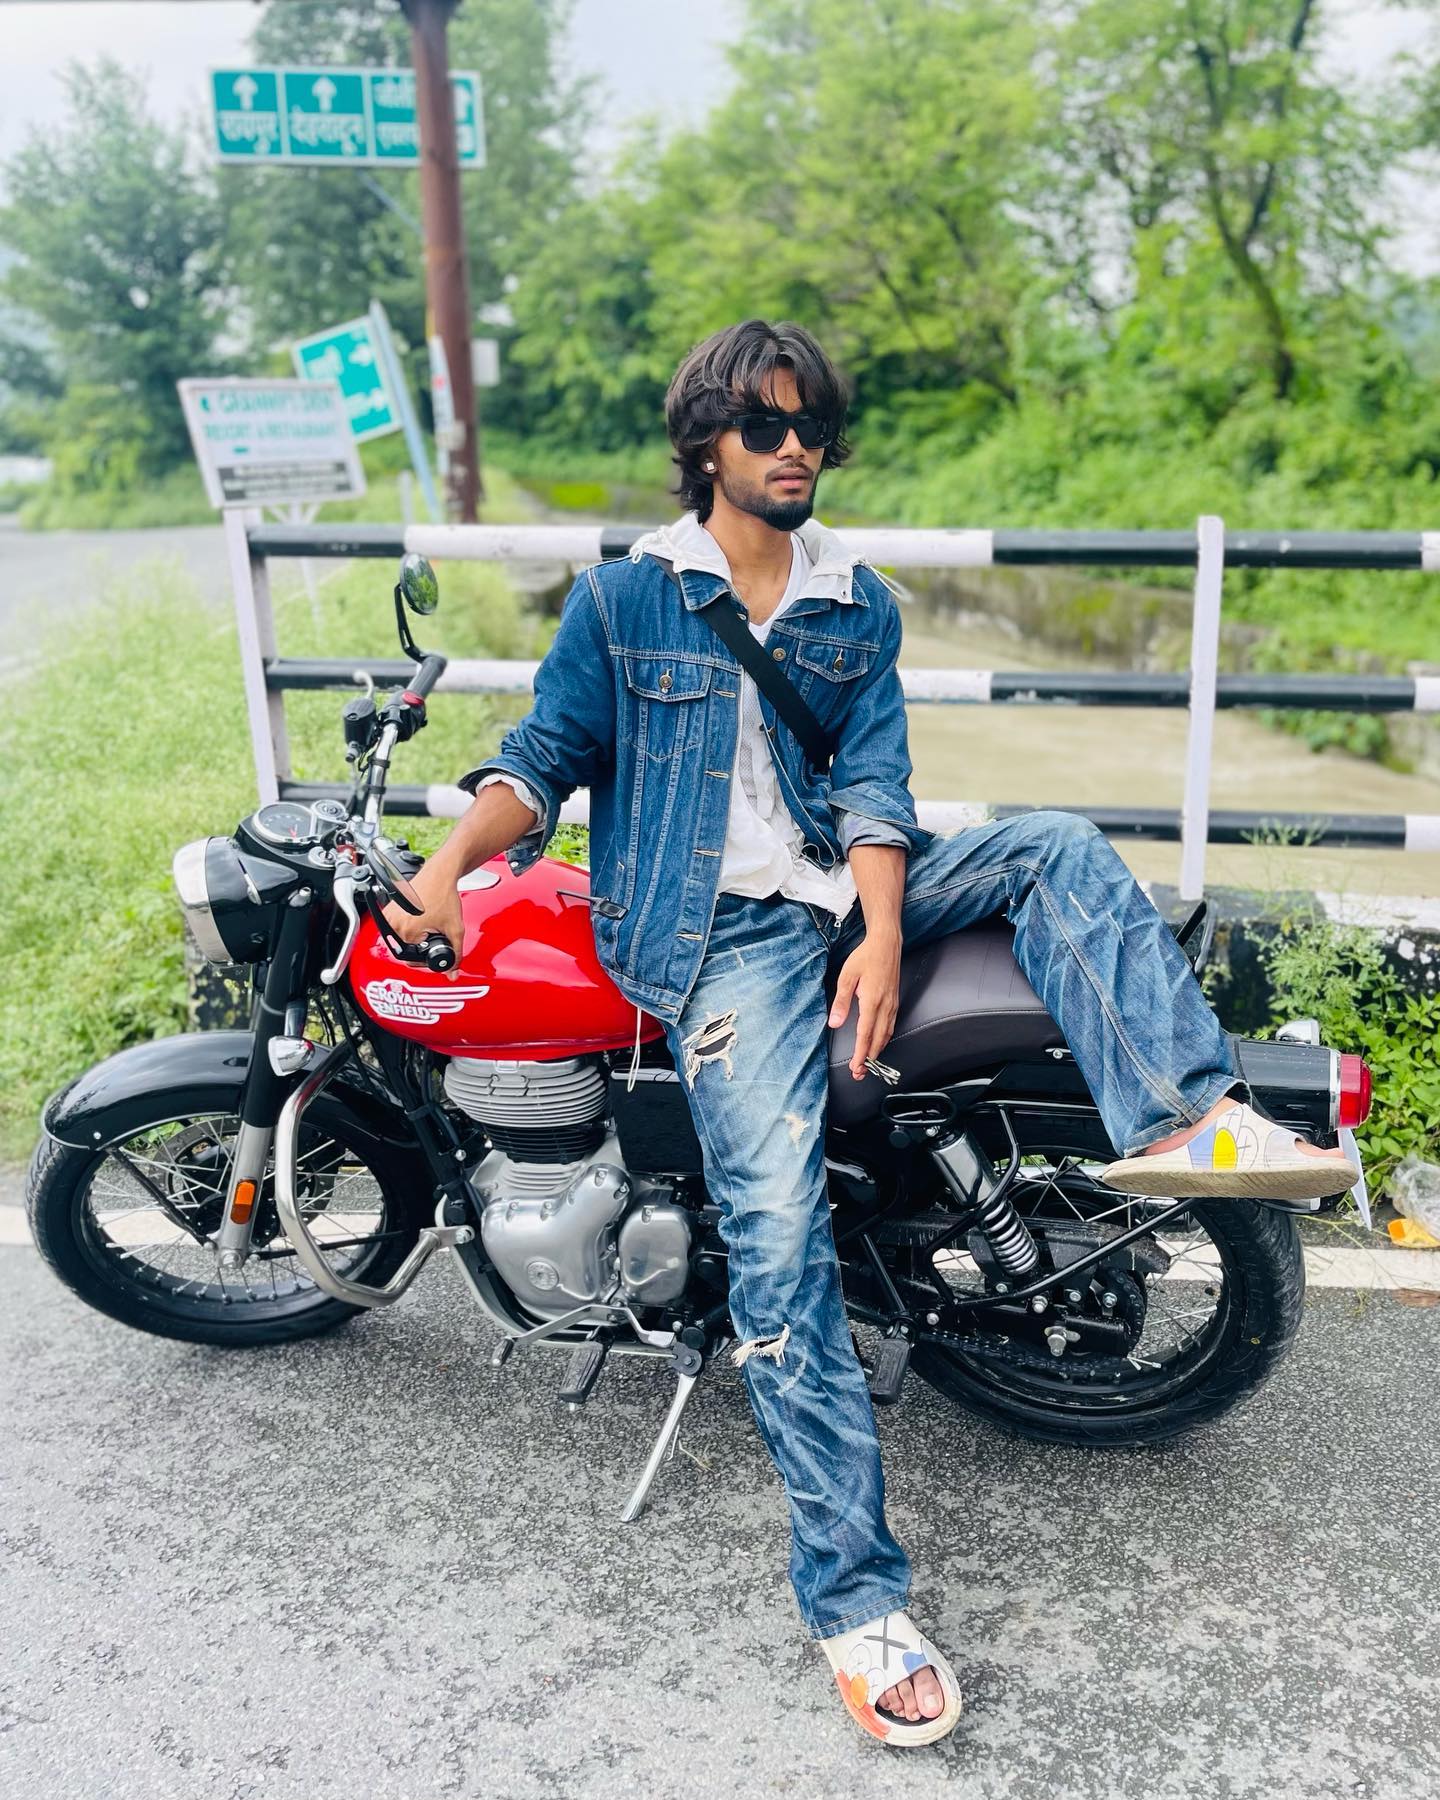 NEW 2022 BIKE POSES FOR PHOTOSHOOT🔥 | ROYAL ENFIELD PHOTOSHOOT POSES FOR  BOYS | NEW POSES 2021 - YouTube